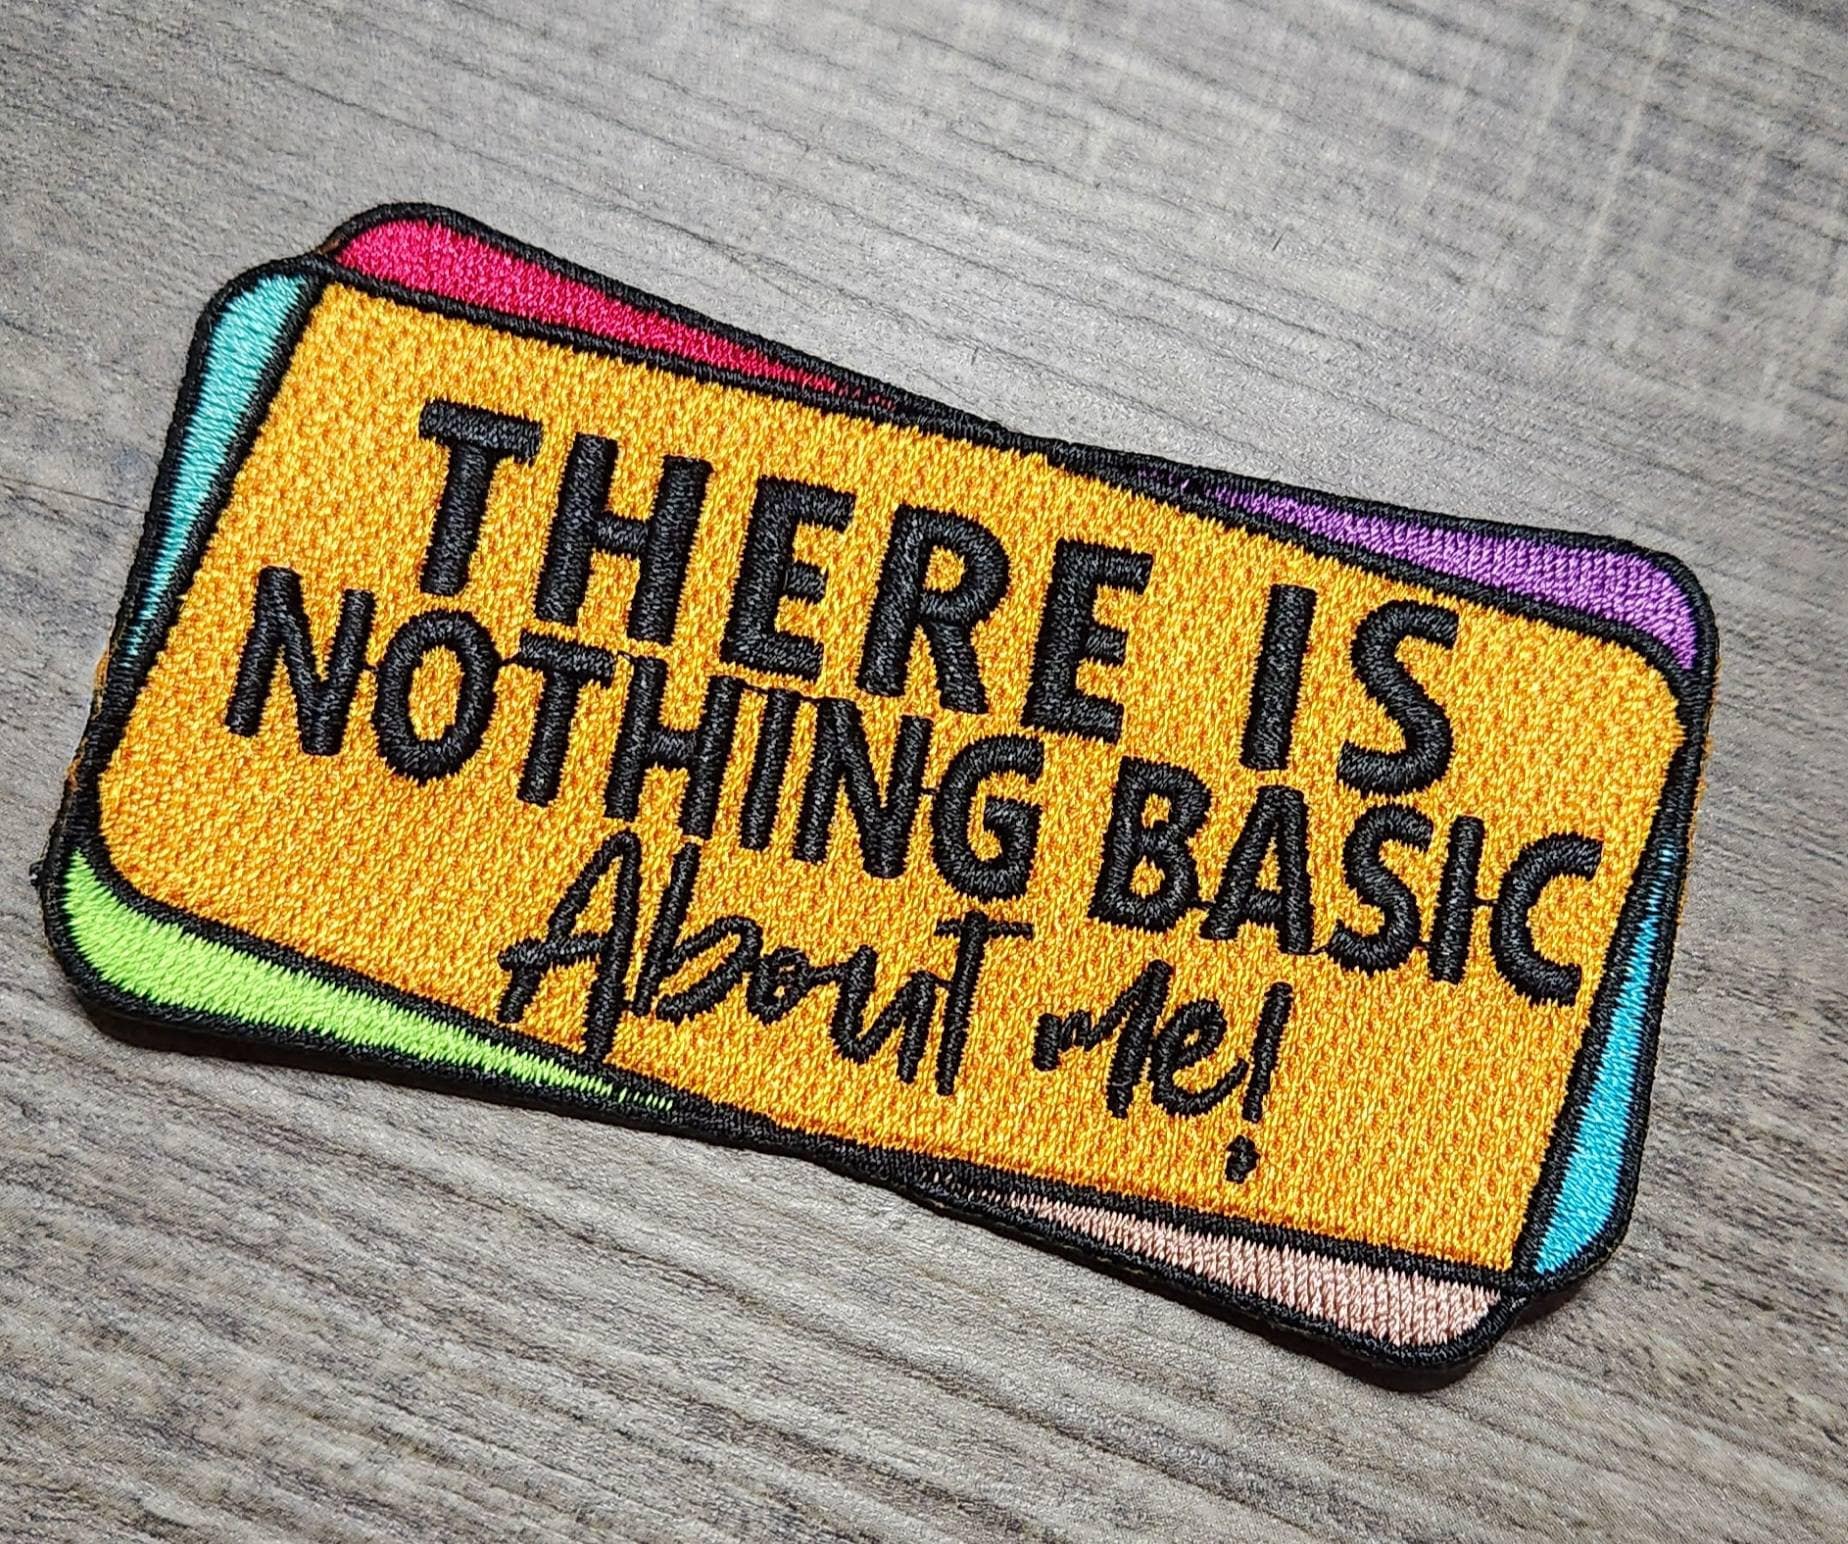 NEW, 1-pc, "There is Nothing Basic About Me" Statement Badge, Iron-on Embroidered Patch, Cool Applique for Clothing, Size 3, Colorful Patch